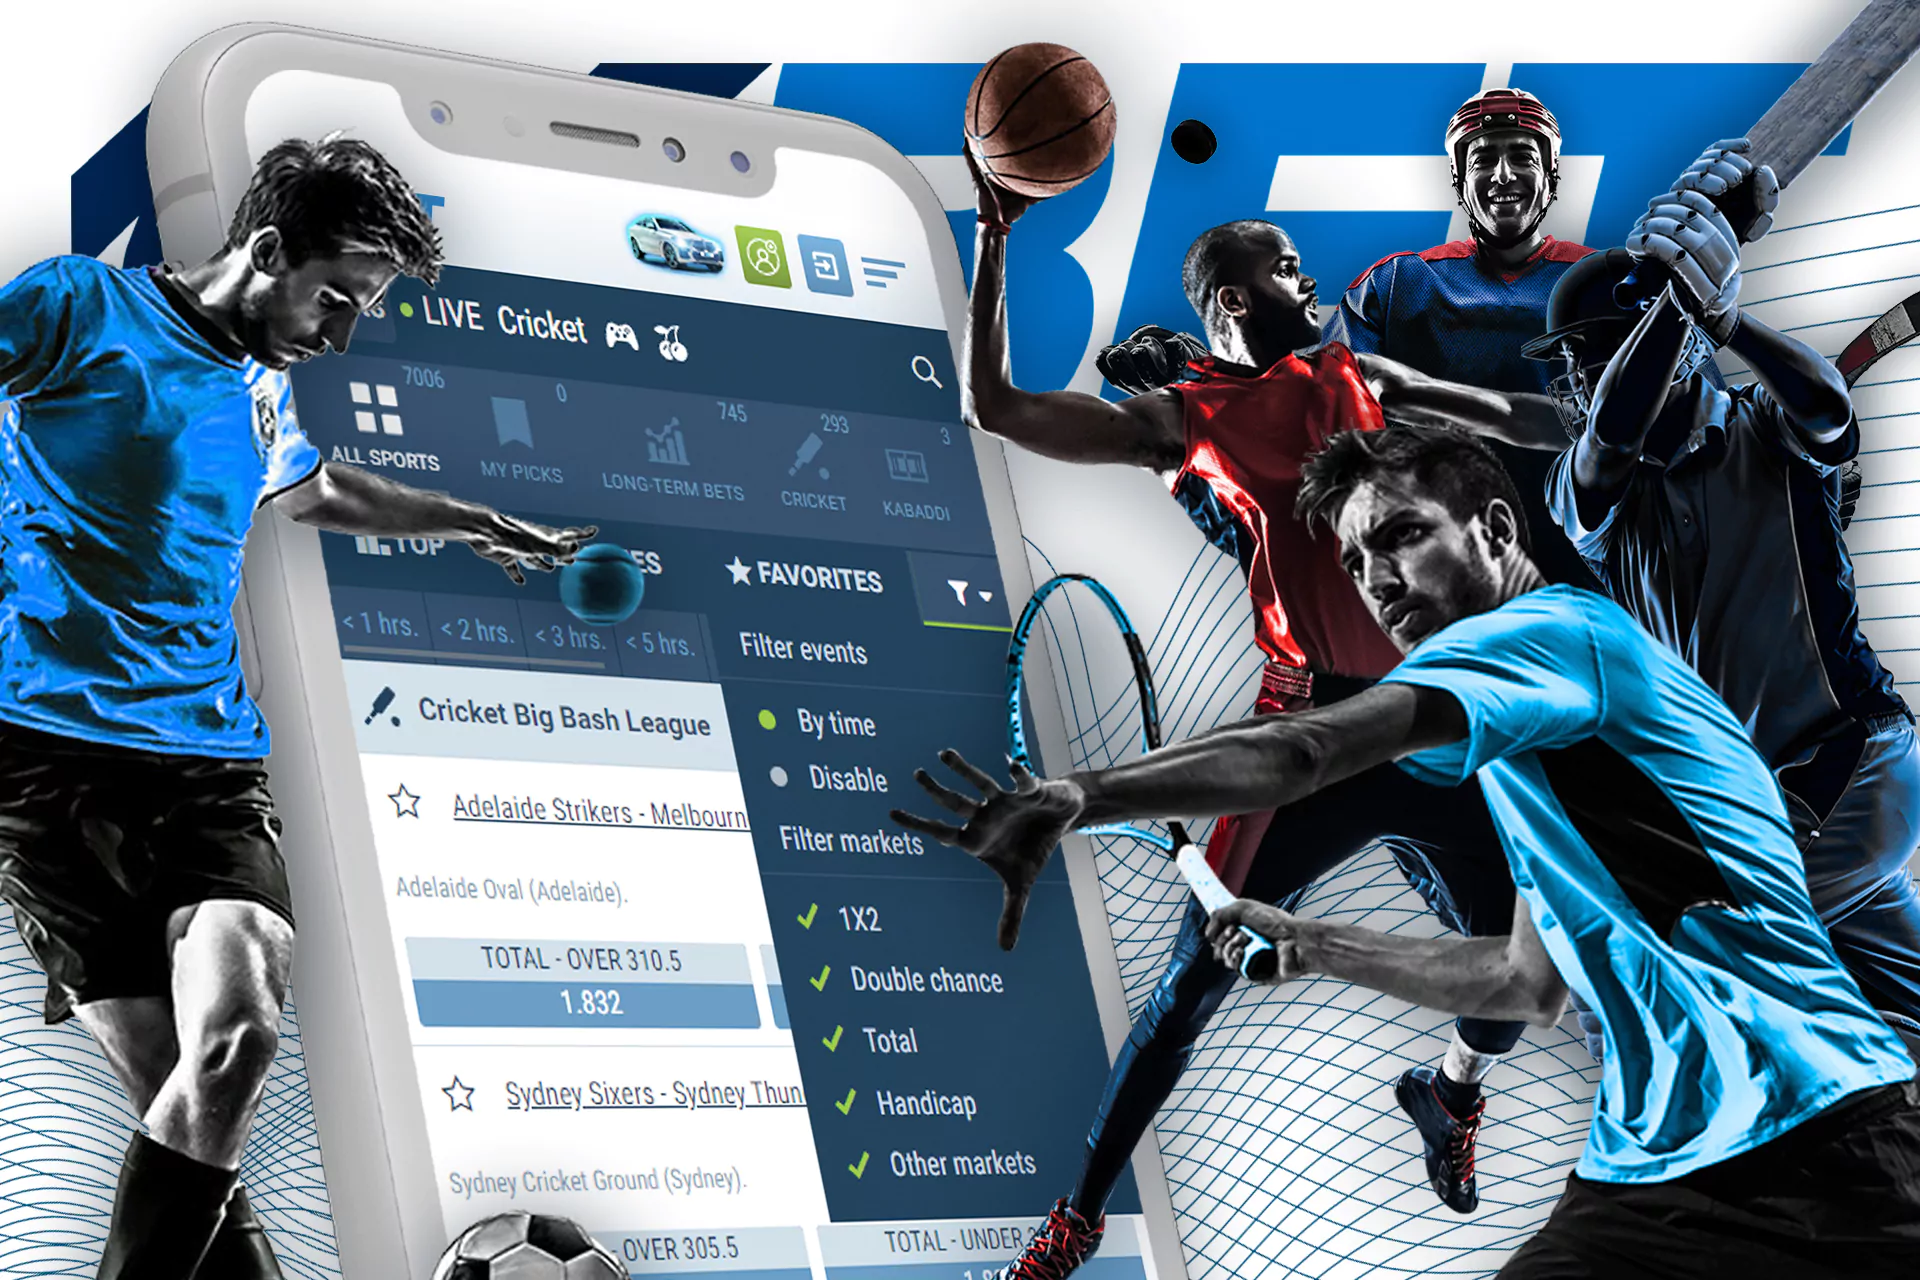 1xBet focuses on sports betting including cricket, football, tennis and others.